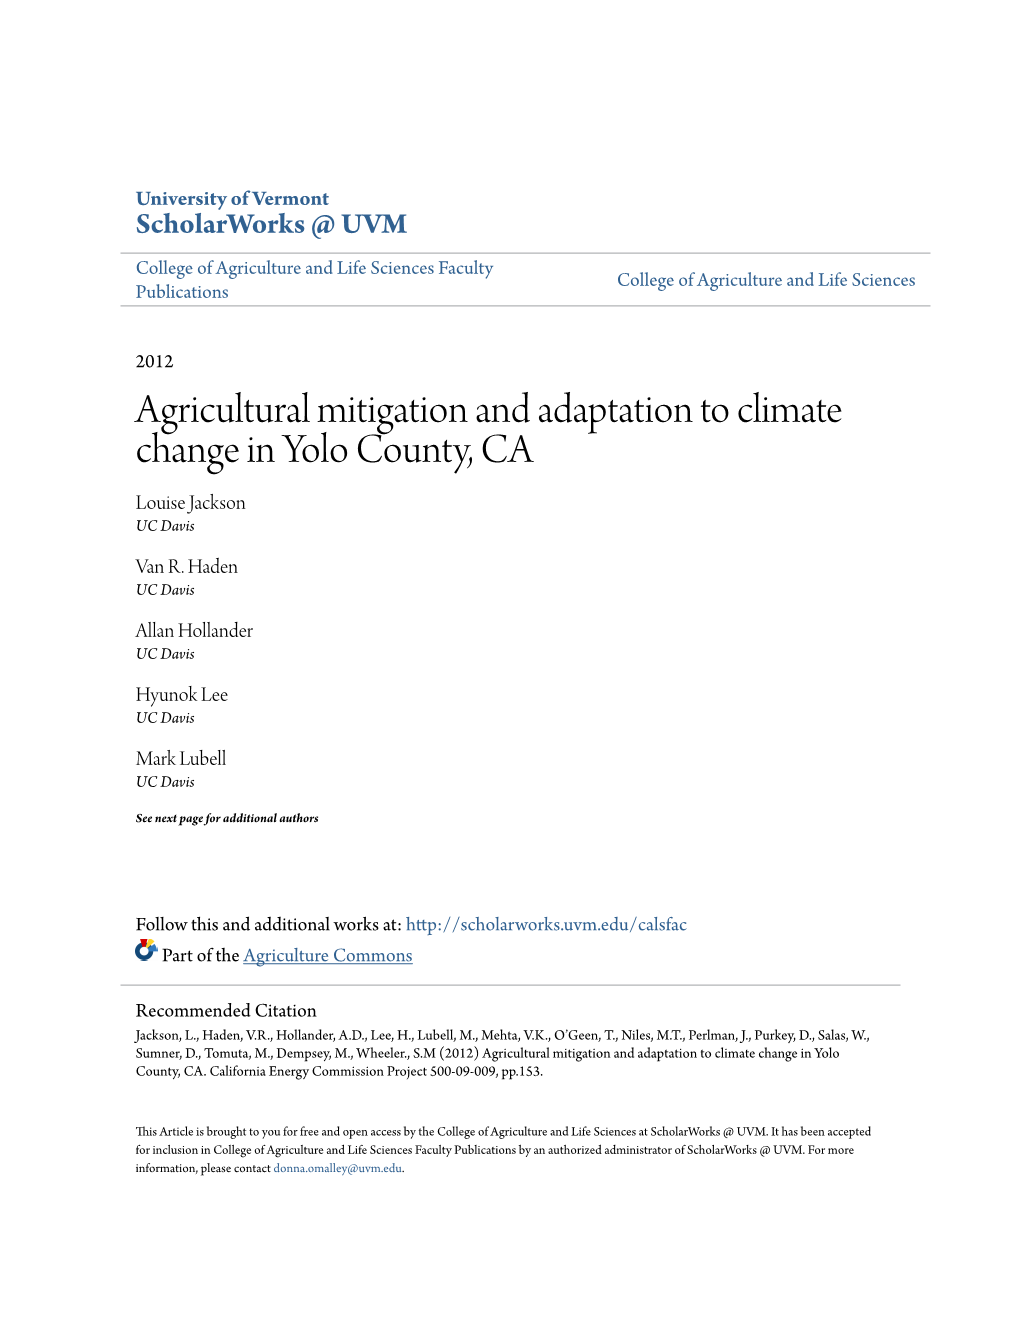 Agricultural Mitigation and Adaptation to Climate Change in Yolo County, CA Louise Jackson UC Davis